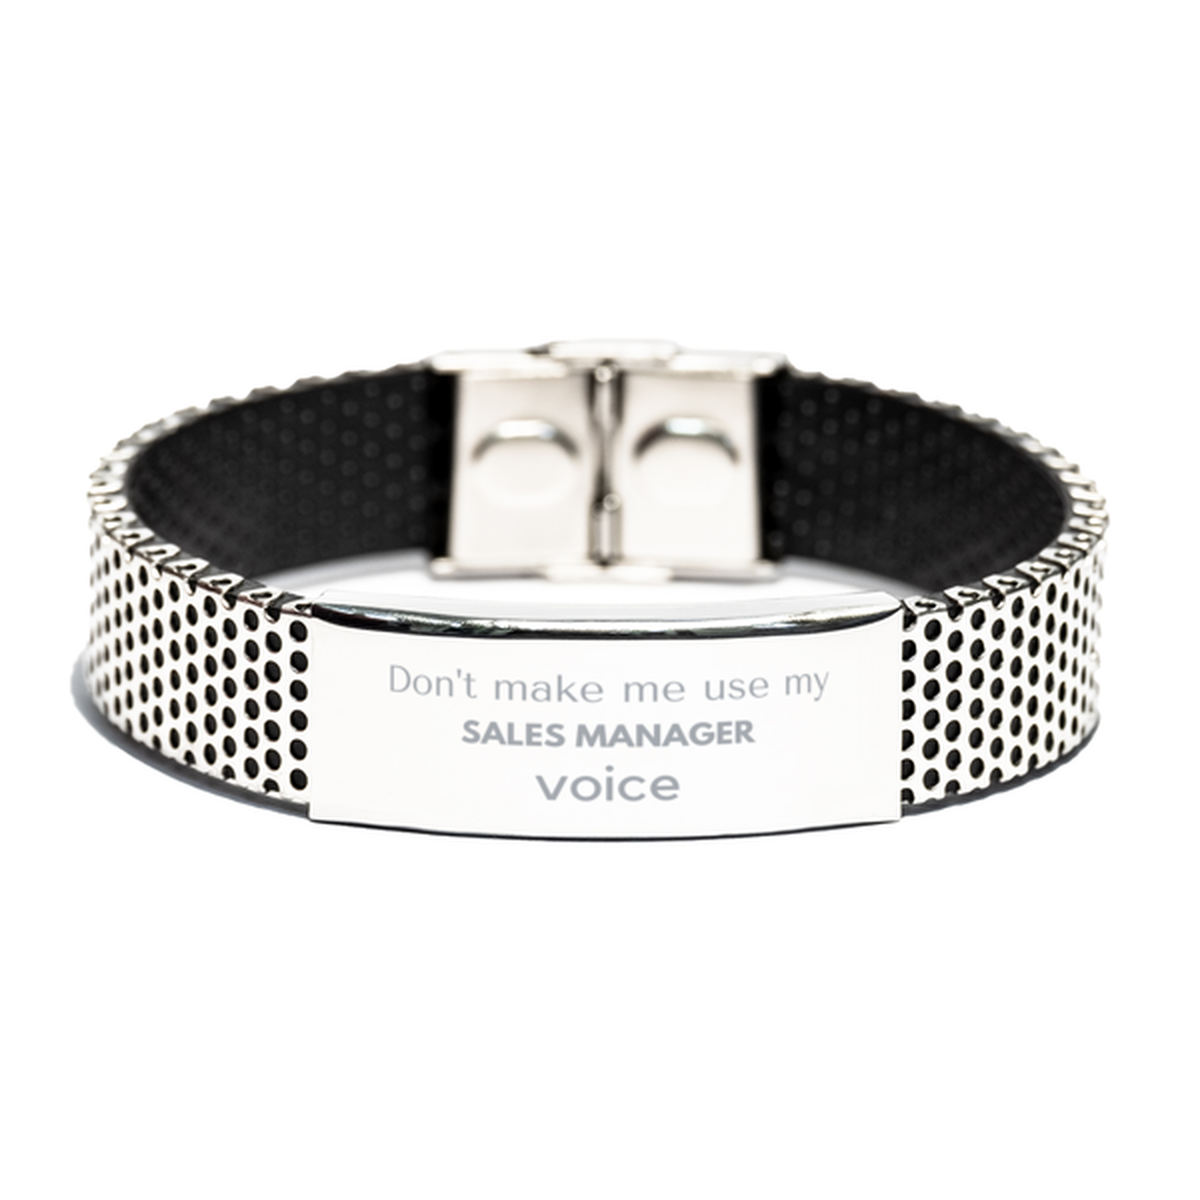 Don't make me use my Sales Manager voice, Sarcasm Sales Manager Gifts, Christmas Sales Manager Stainless Steel Bracelet Birthday Unique Gifts For Sales Manager Coworkers, Men, Women, Colleague, Friends